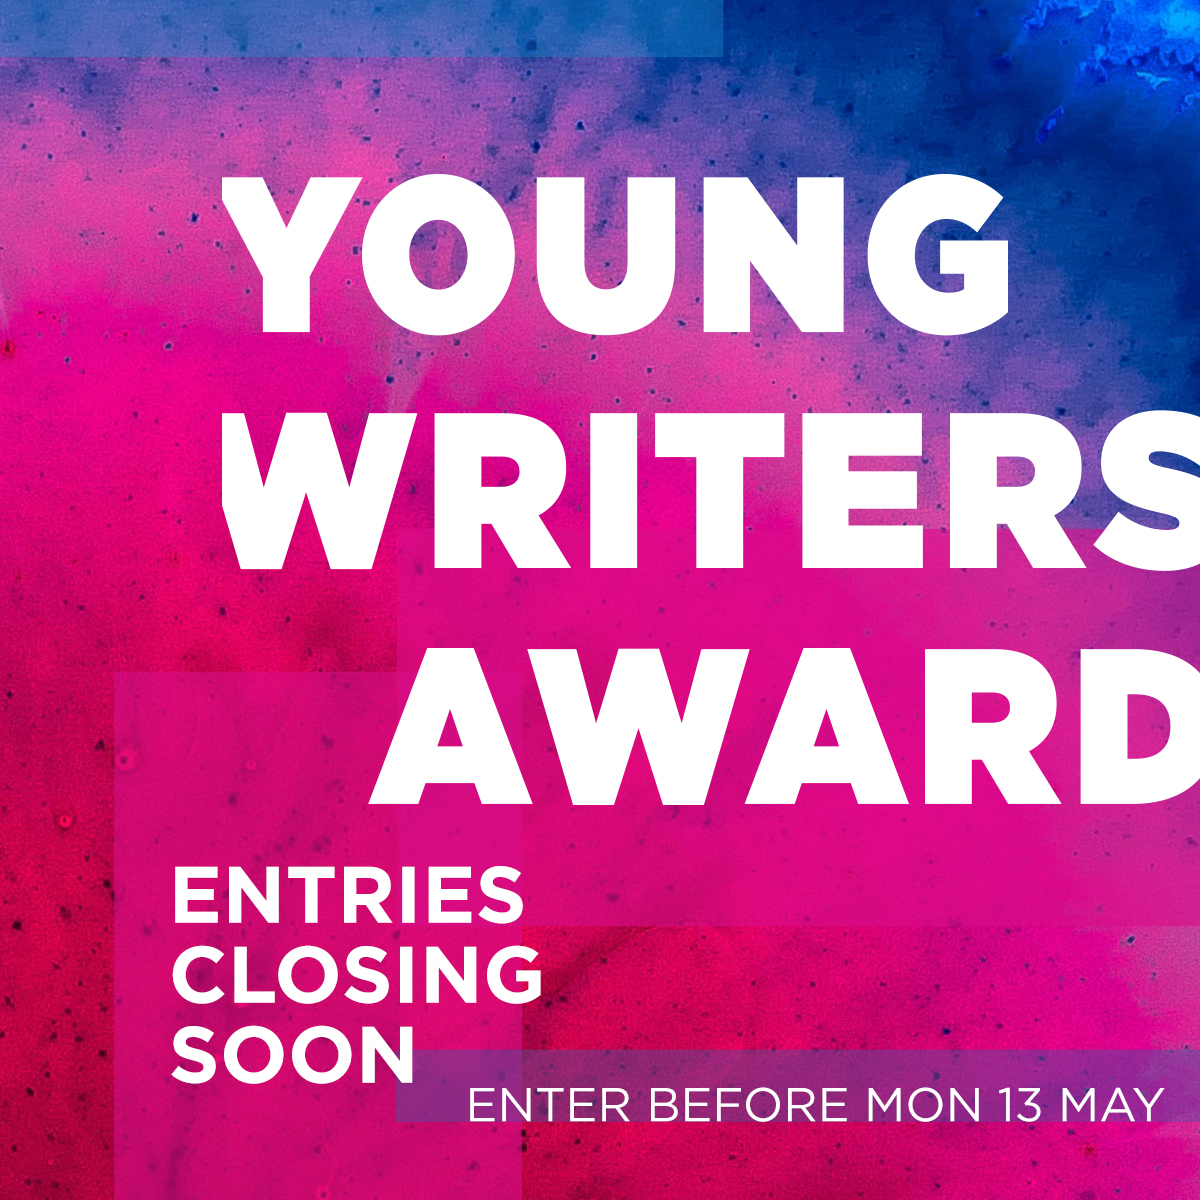 Entry is free and closing soon! You (or a Queensland writer you know aged 18–25!) could win $2,000 and be published by @kyd_magazine. Head to our website for more info and to submit your short story today ow.ly/t6kZ50RA2Cj